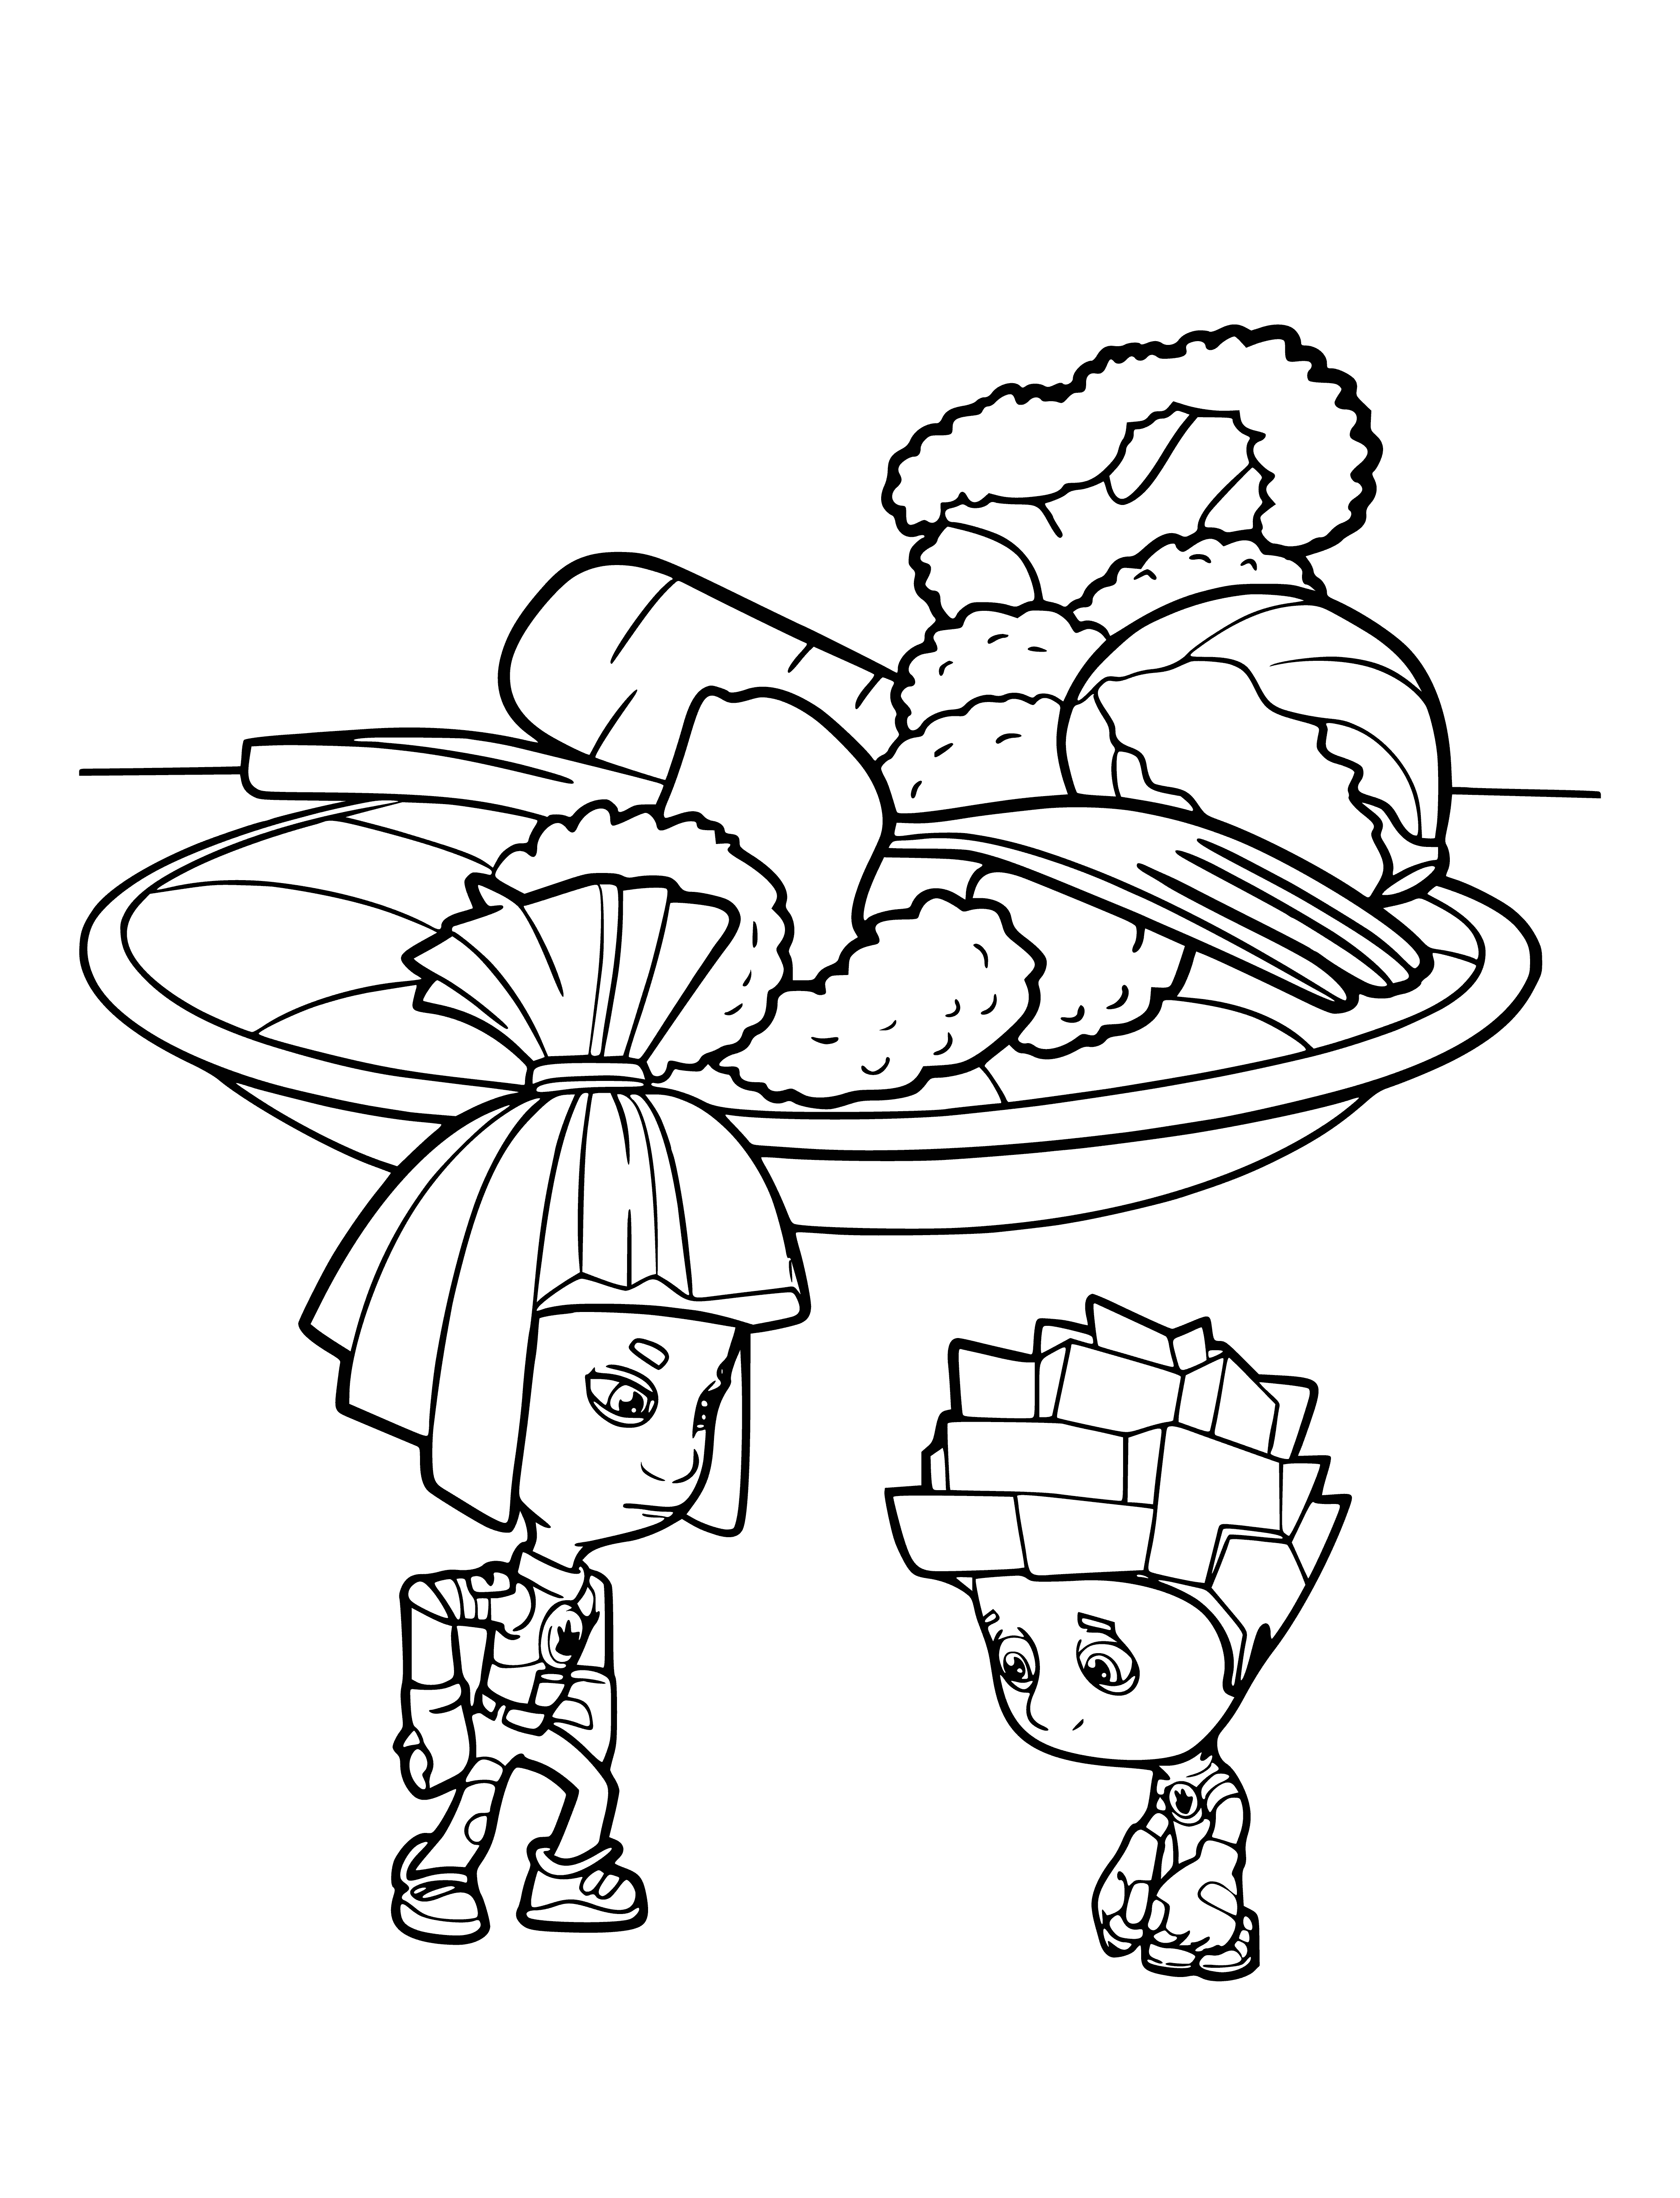 coloring page: Two metal creatures stand hand in hand, big headed & small bodies, 2 legs & 2 arms each. #ColoringPage